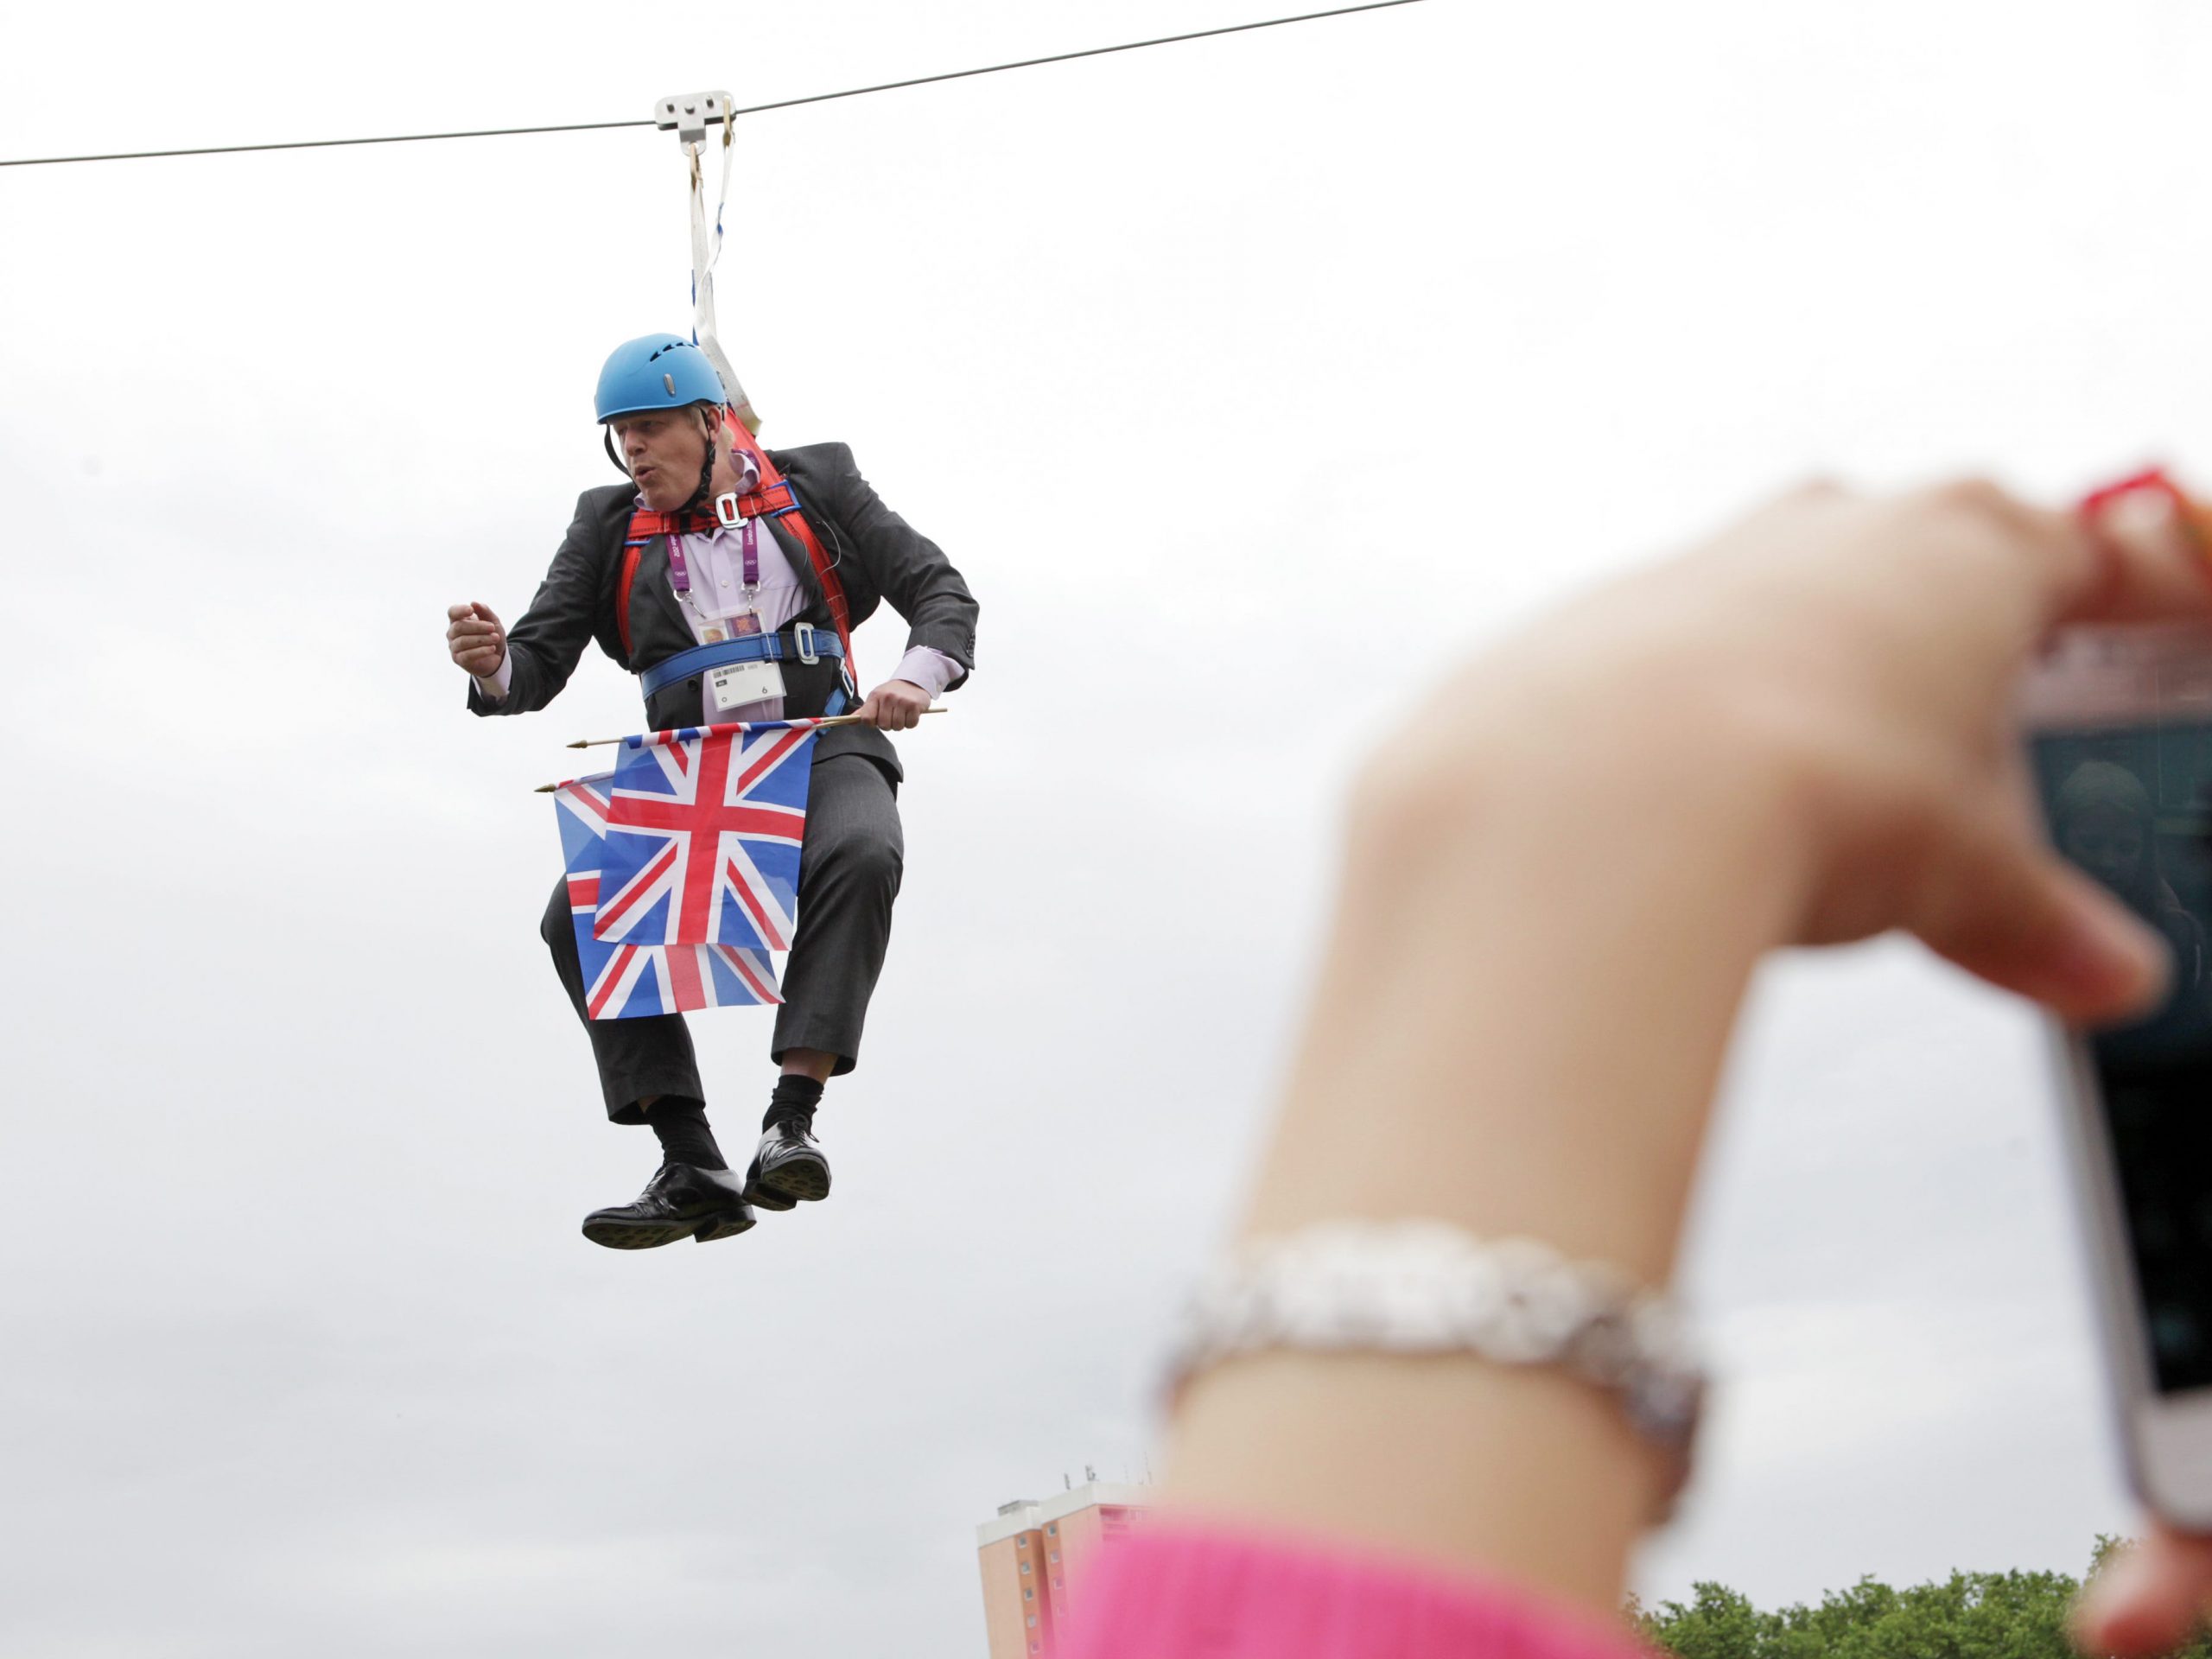 Then-Mayor of London Boris Johnson got stuck on a zip-line during BT London Live in Victoria Park on August 01, 2012 in London, England.